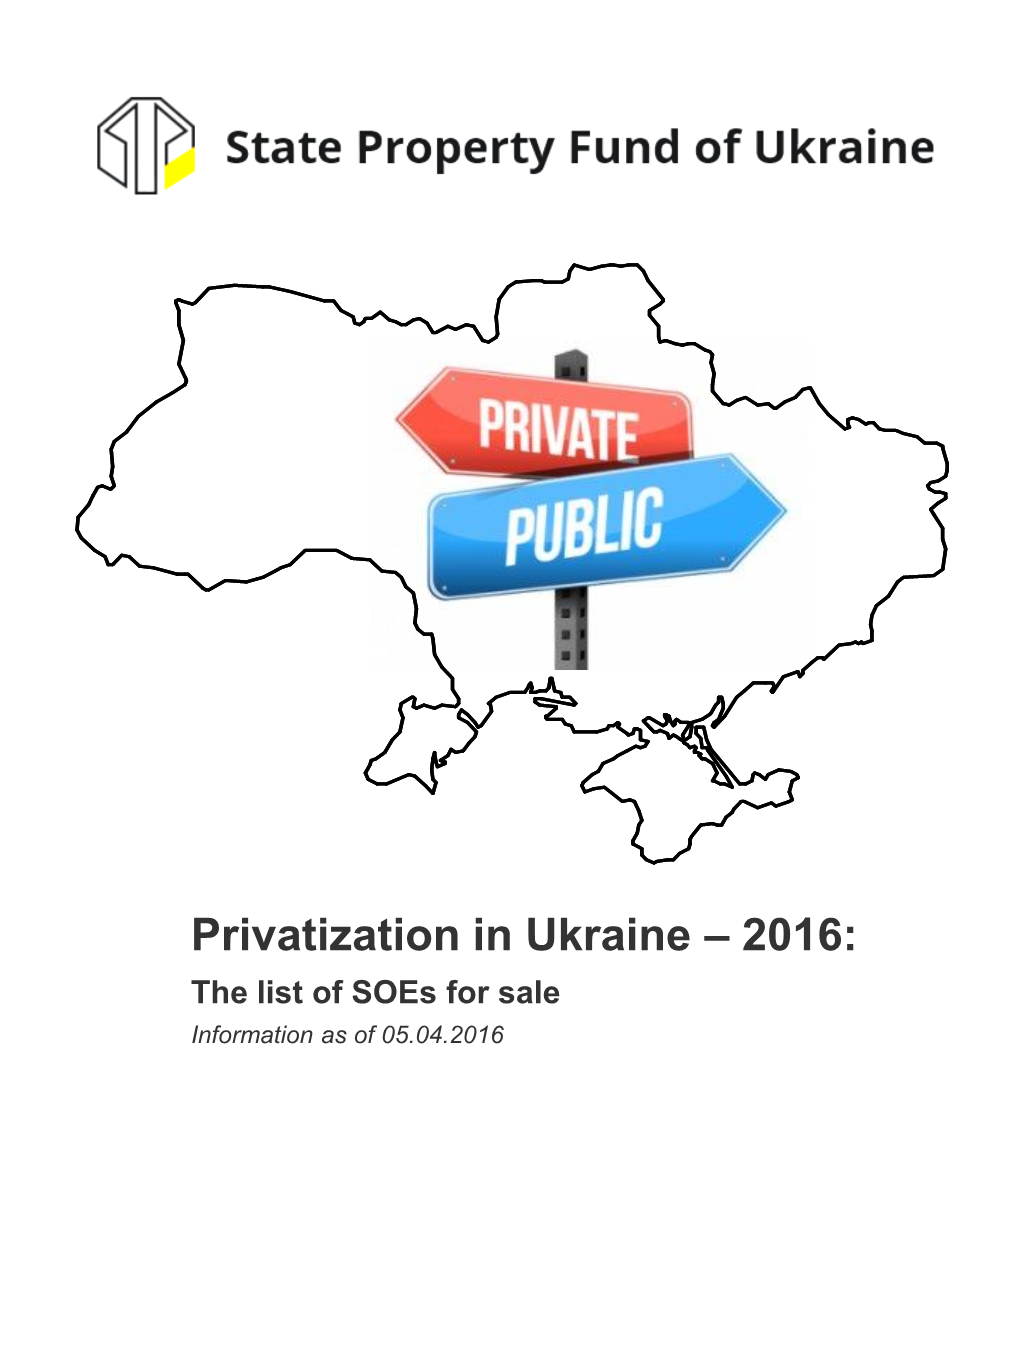 Privatization in Ukraine – 2016: the List of Soes for Sale Information As of 05.04.2016 Scheduled for Sale in 2016